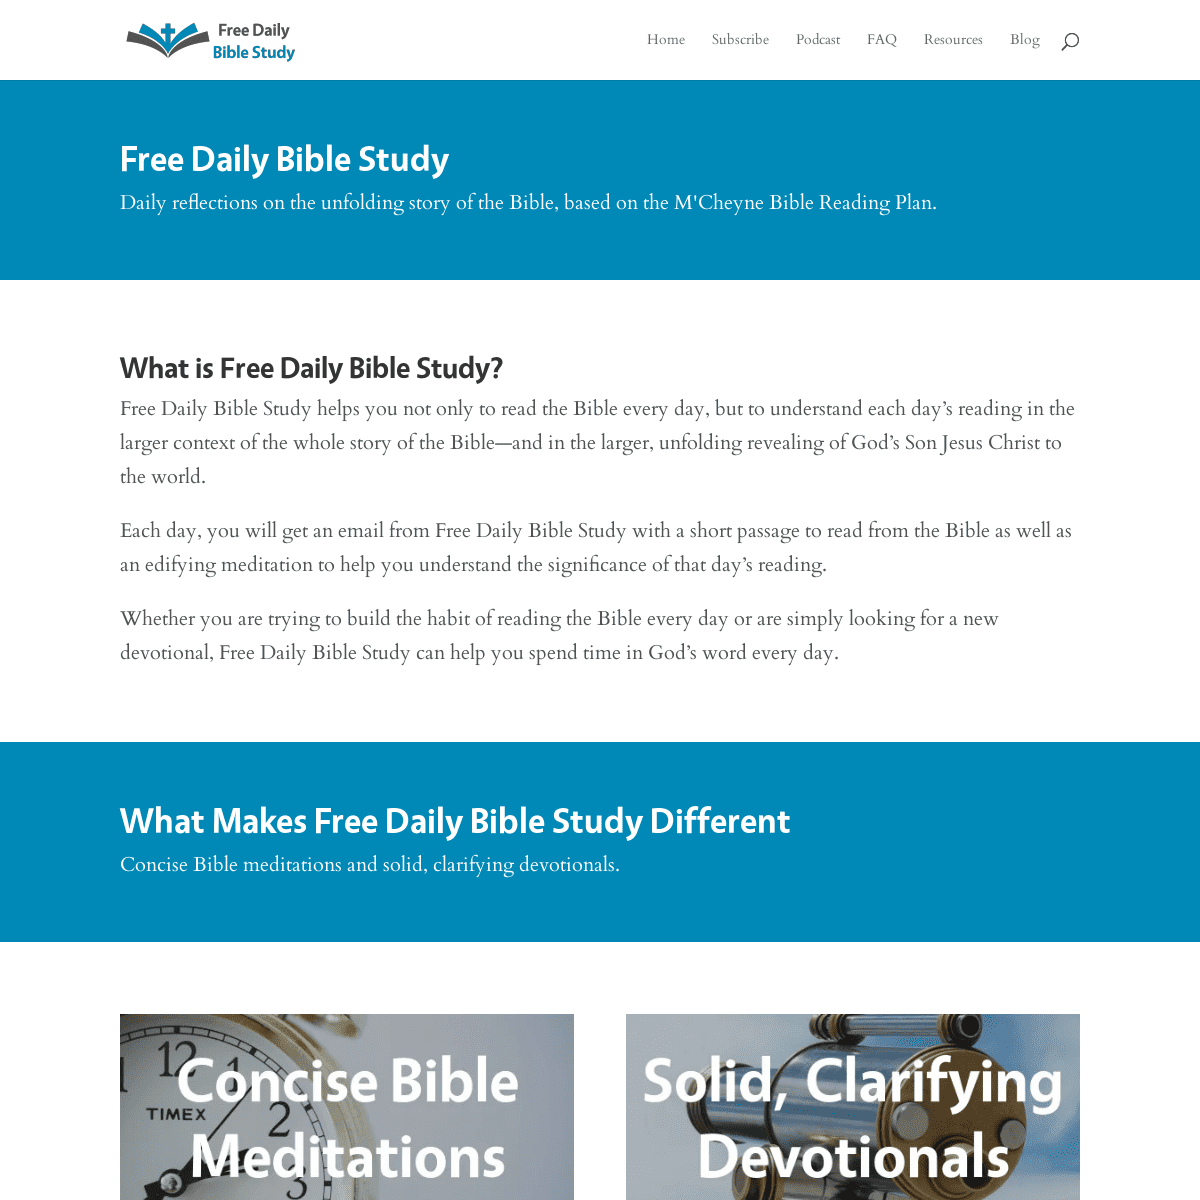 A complete backup of freedailybiblestudy.com